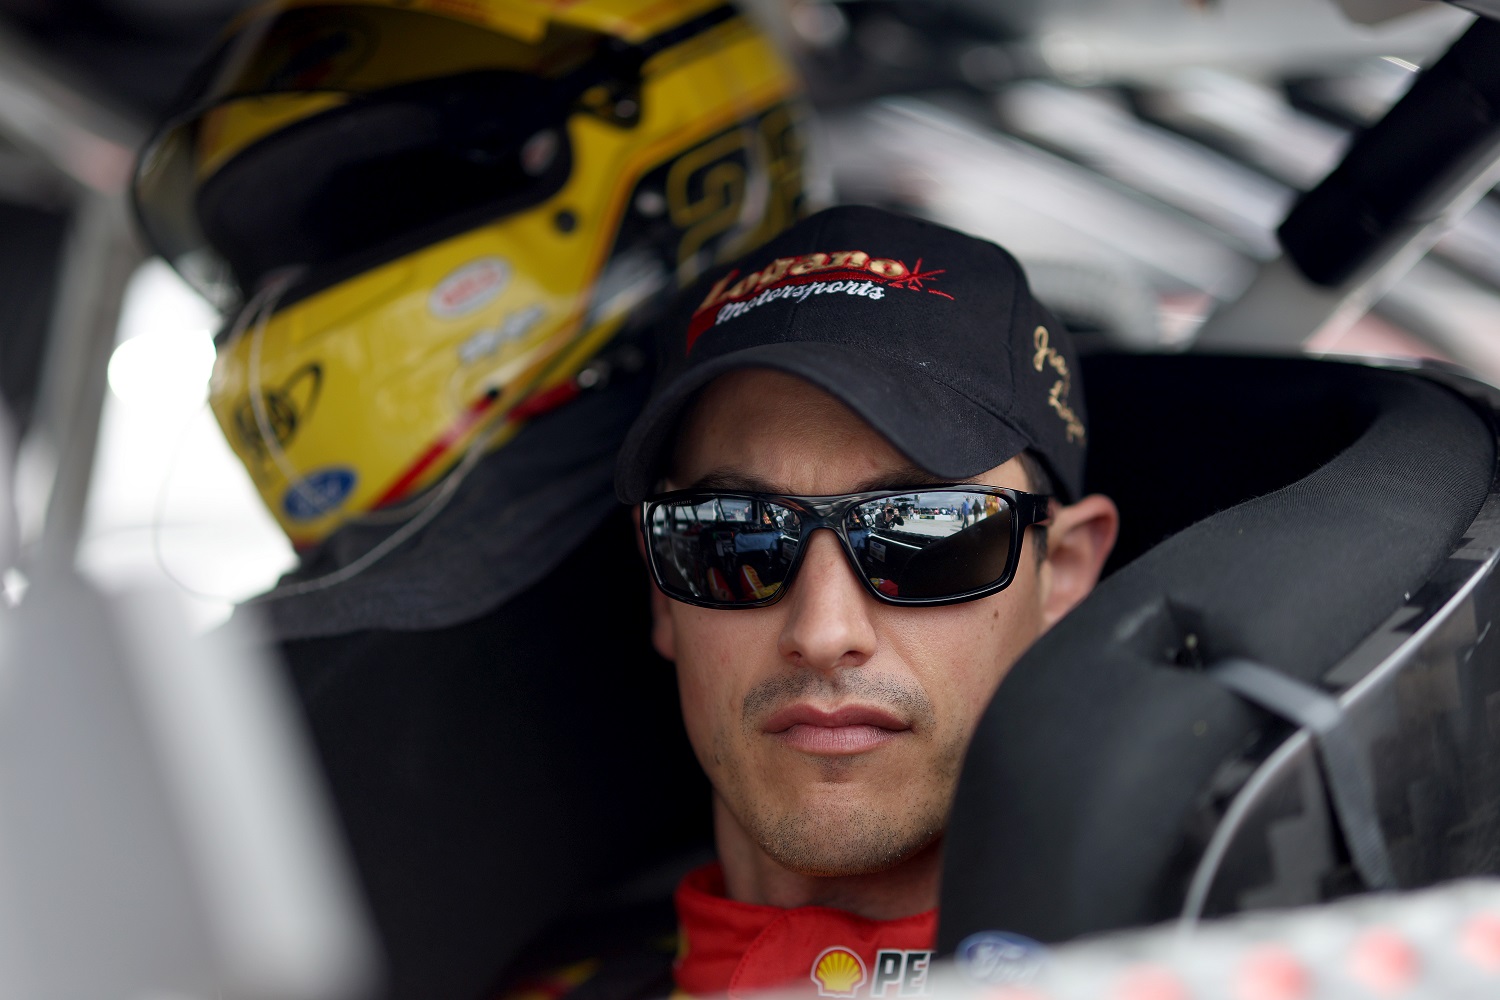 A Dale Earnhardt Comparison Explains Perfectly Why Joey Logano Leads the List of Current NASCAR Cup Series Villains